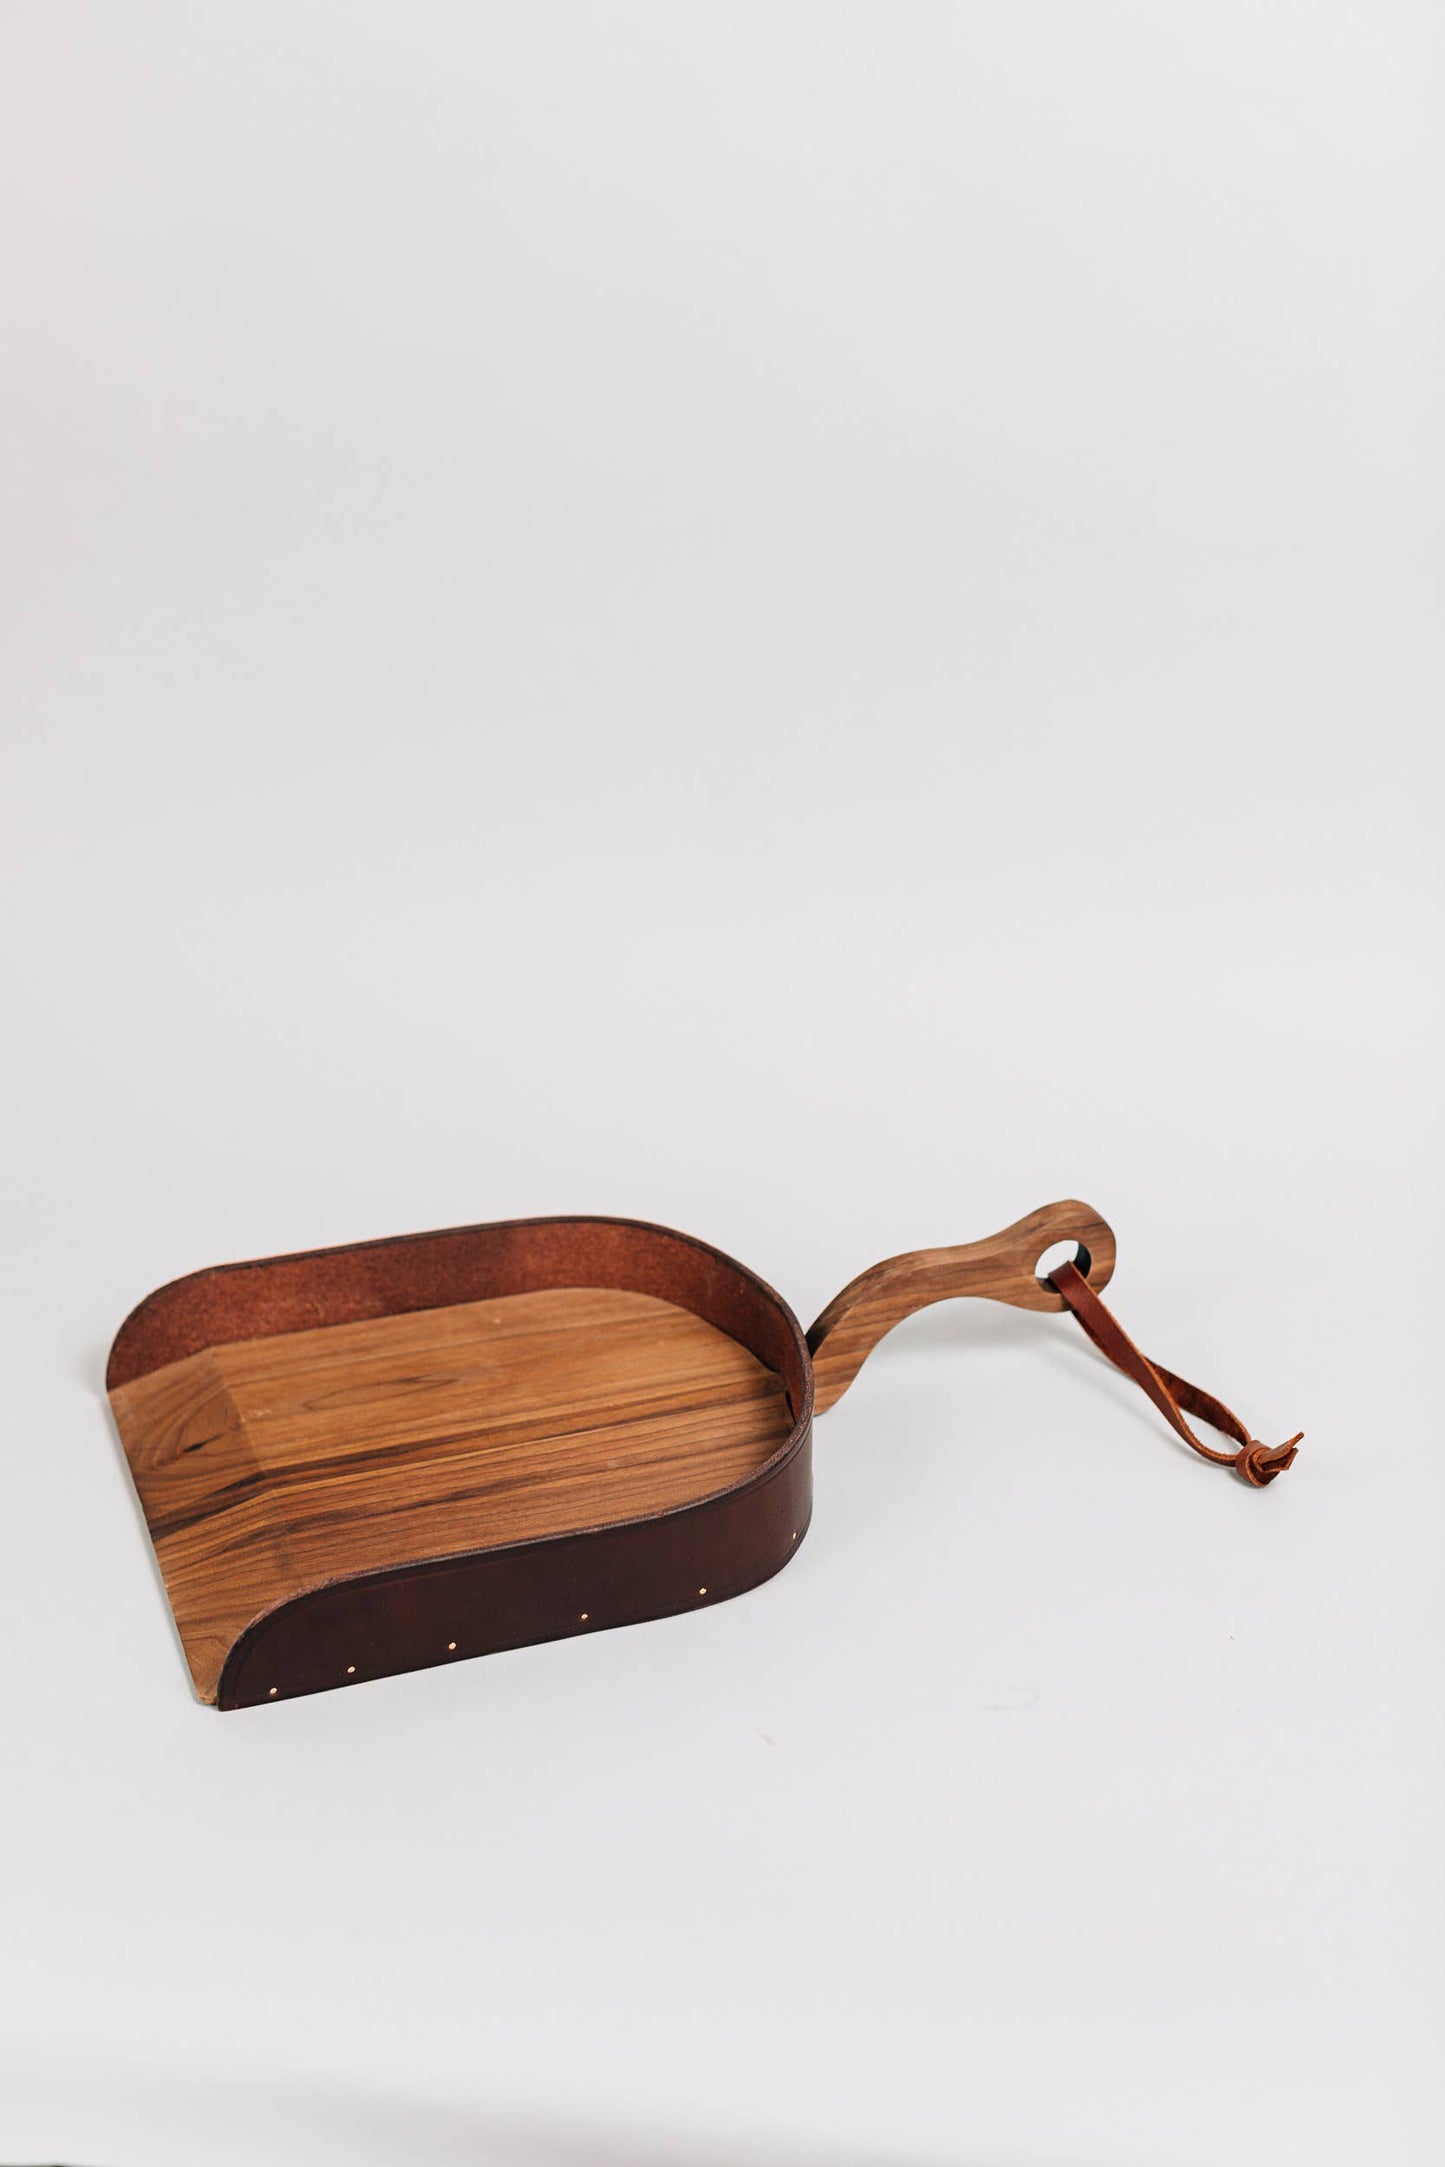 The Wood and Leather Dustpan - large